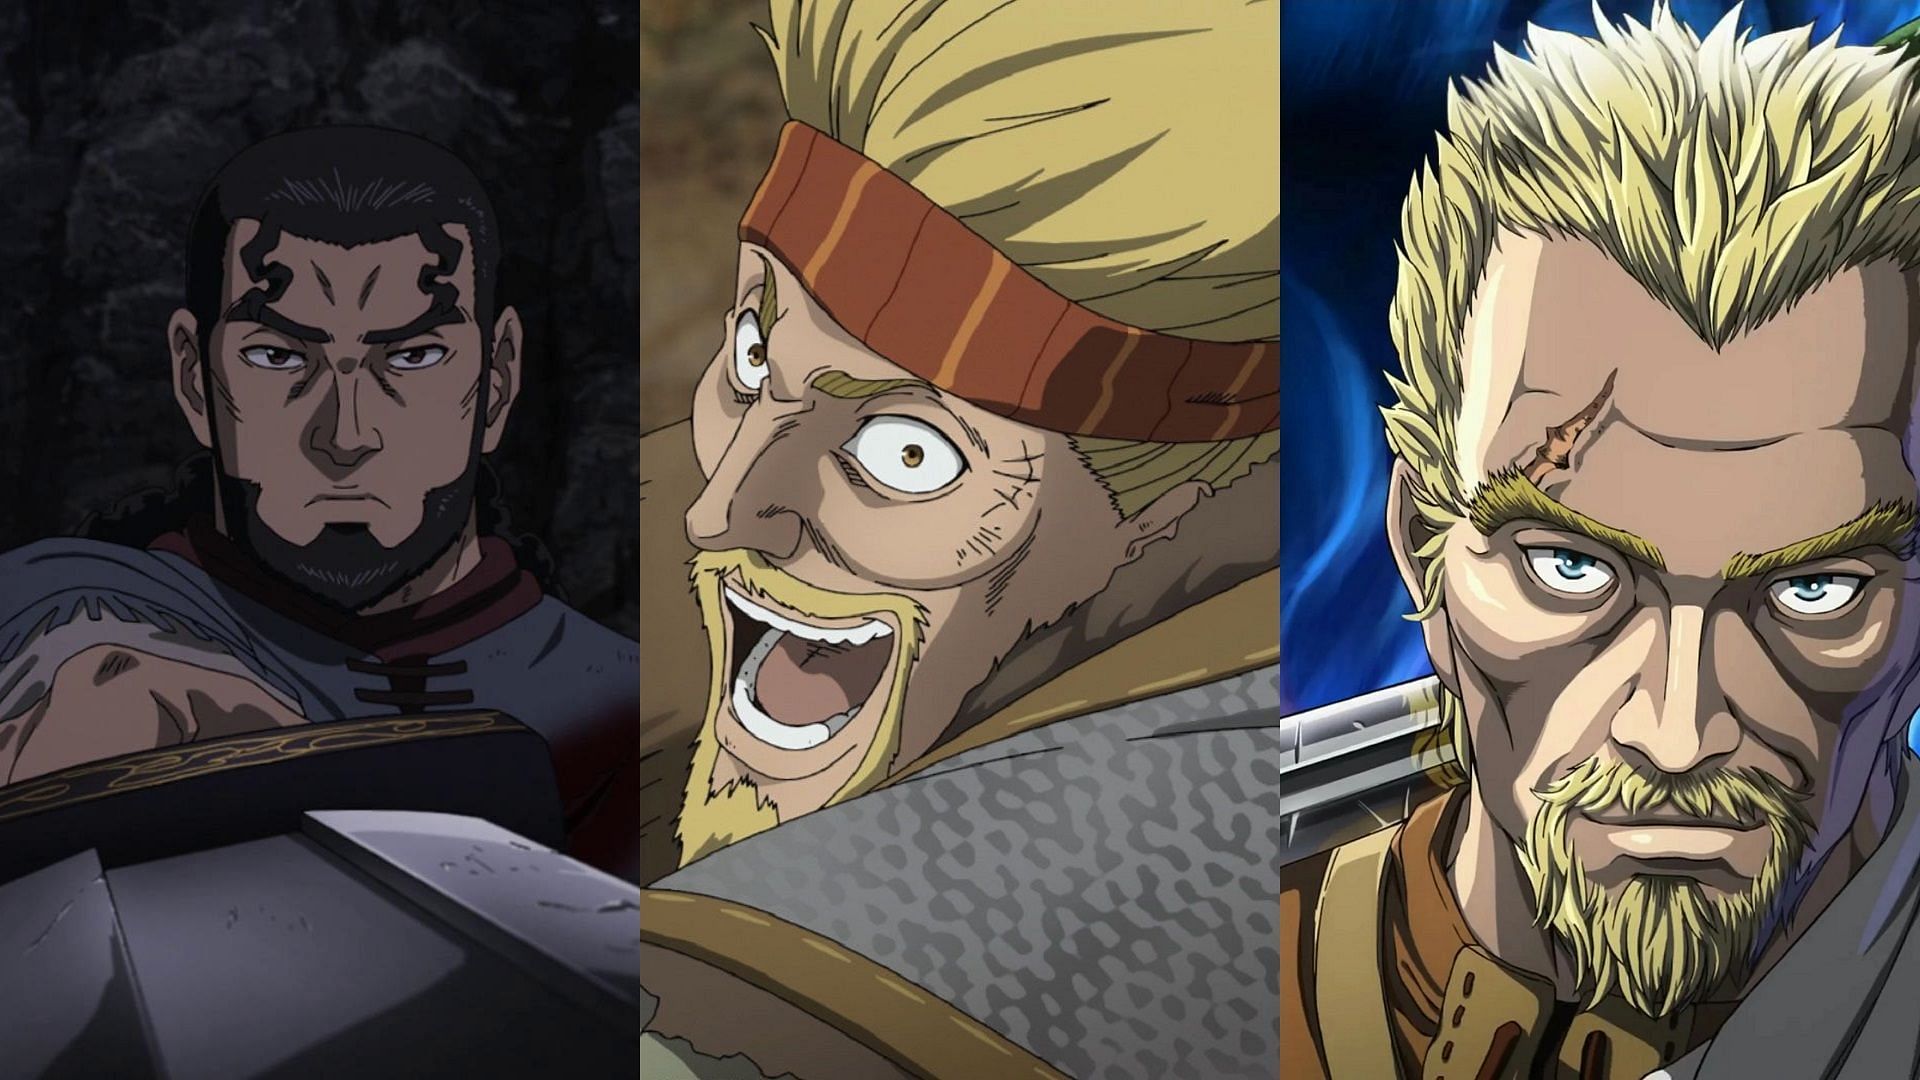 Thors was an unparalleled individual, who not even Thorkell and Askeladd could match in a 1v1 (Image via Wit Studio/Mappa, Vinland Saga)